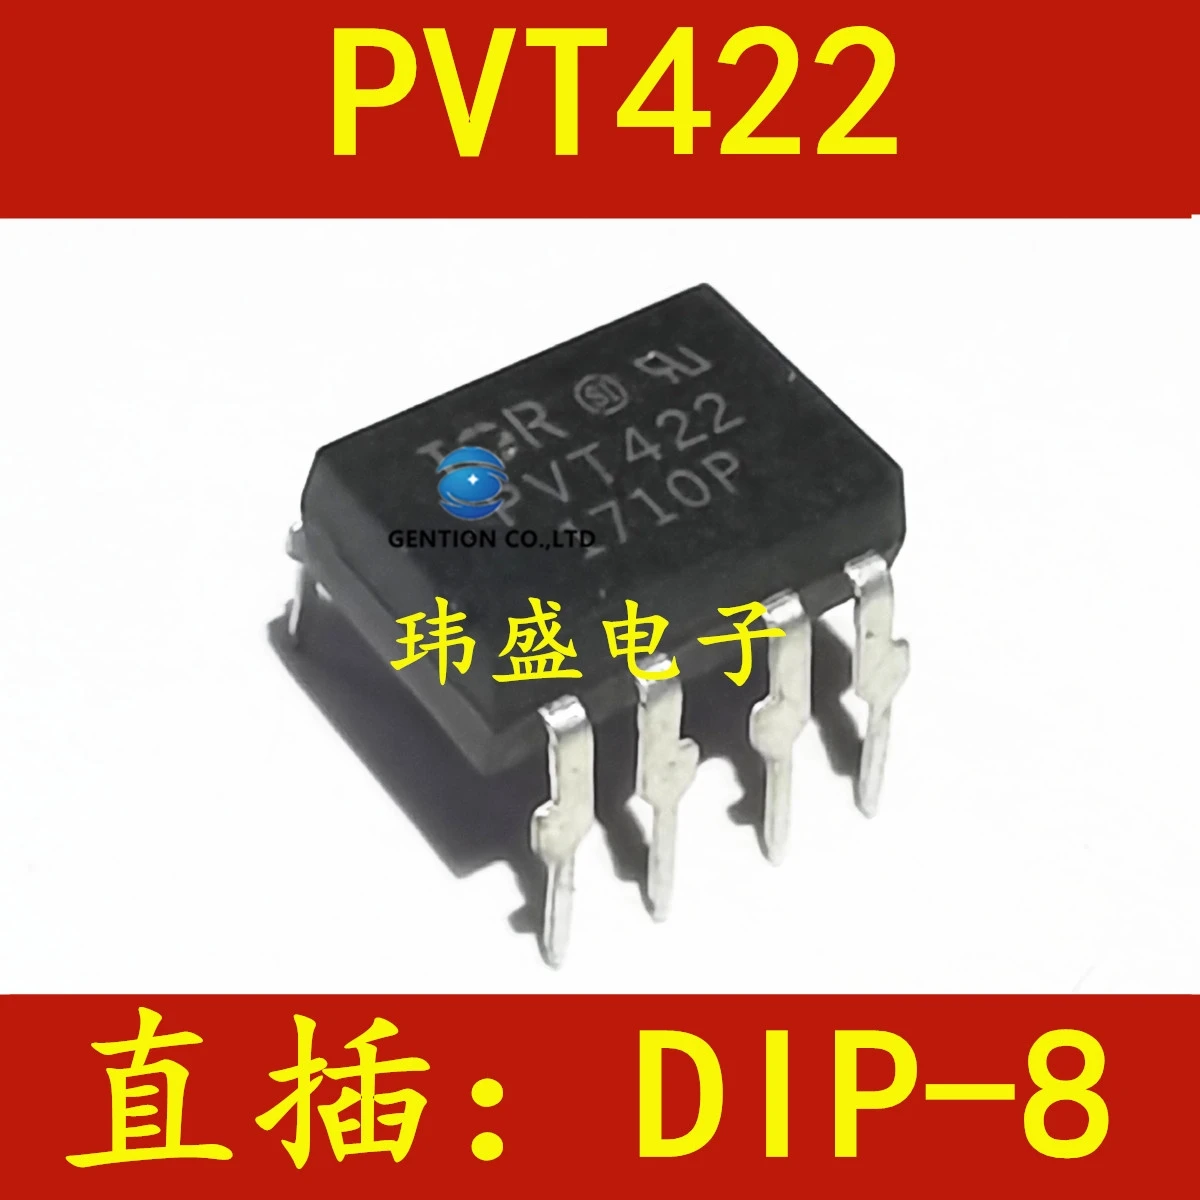 

10PCS PVT422 DIP8 into solid state relay IC decoupling PVT422PBF light in stock 100% new and original